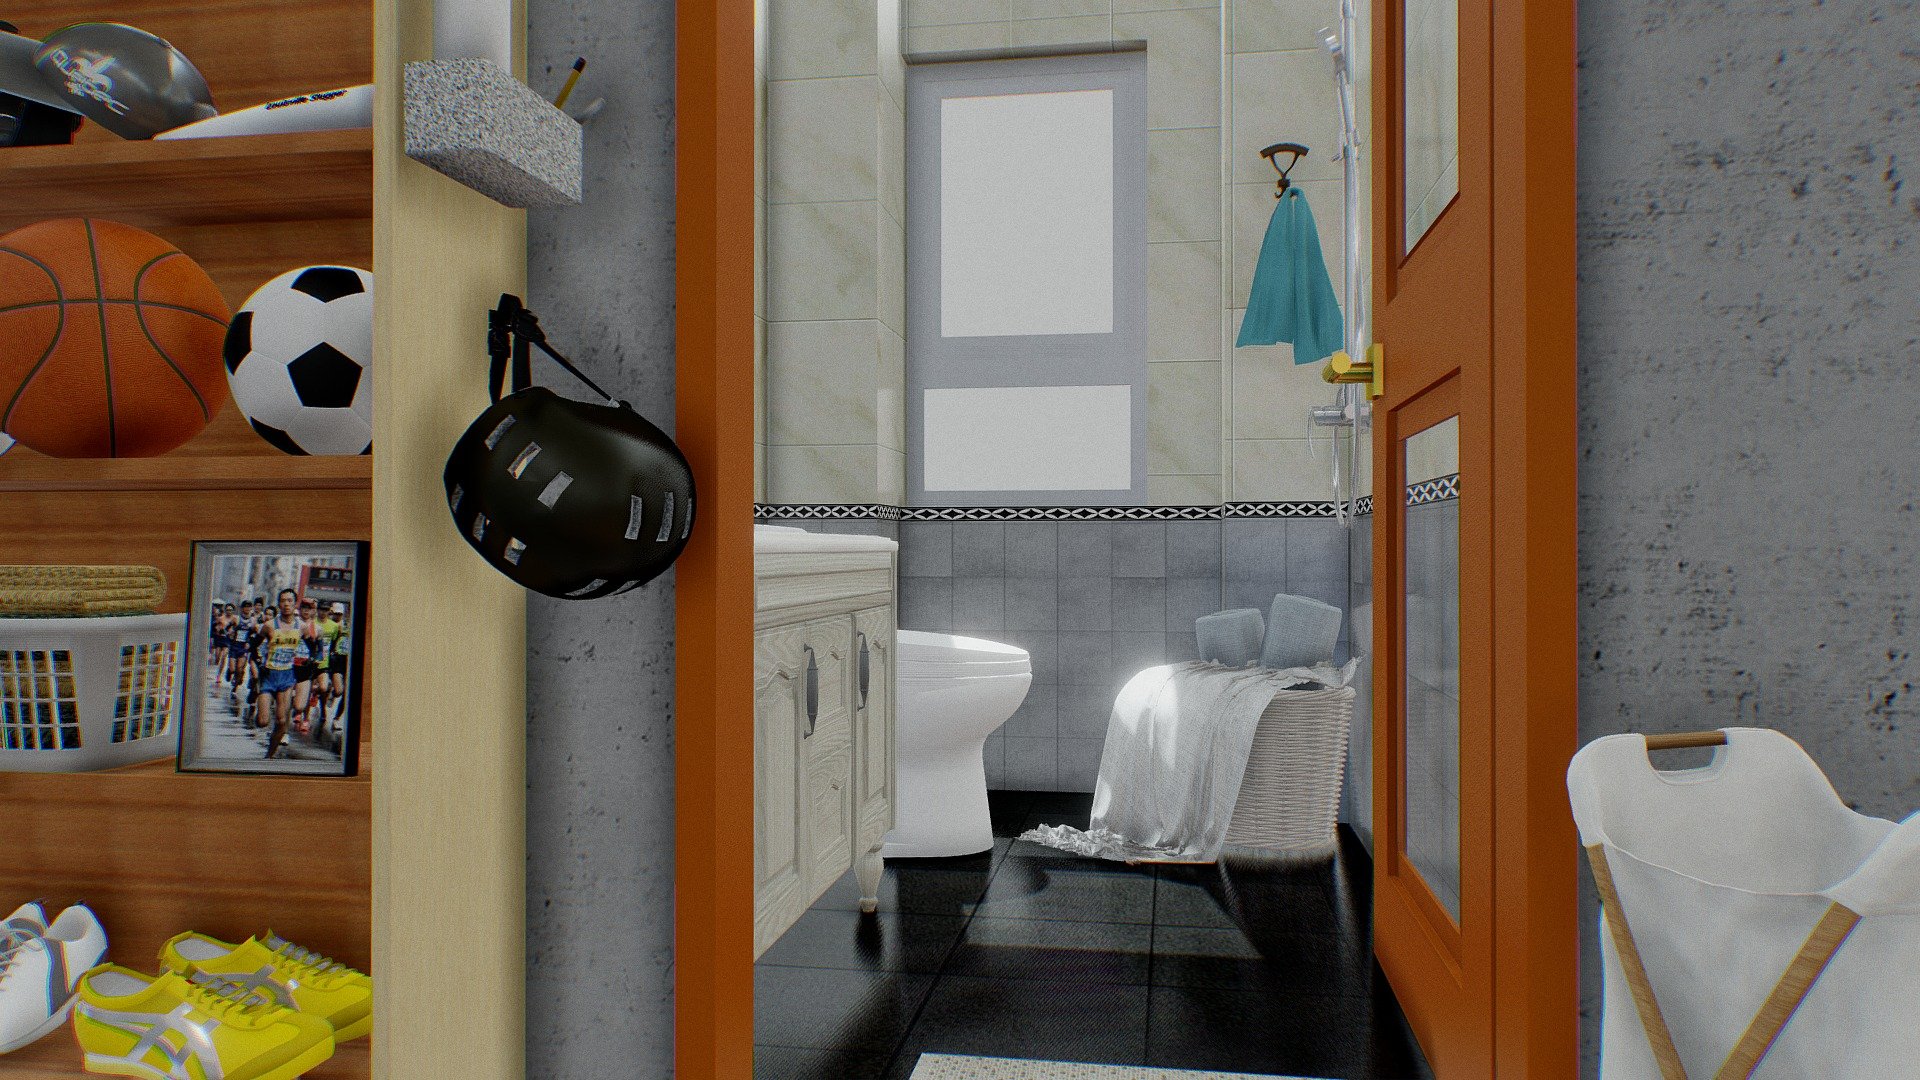 The bathroom is entirely my own creation 3d model